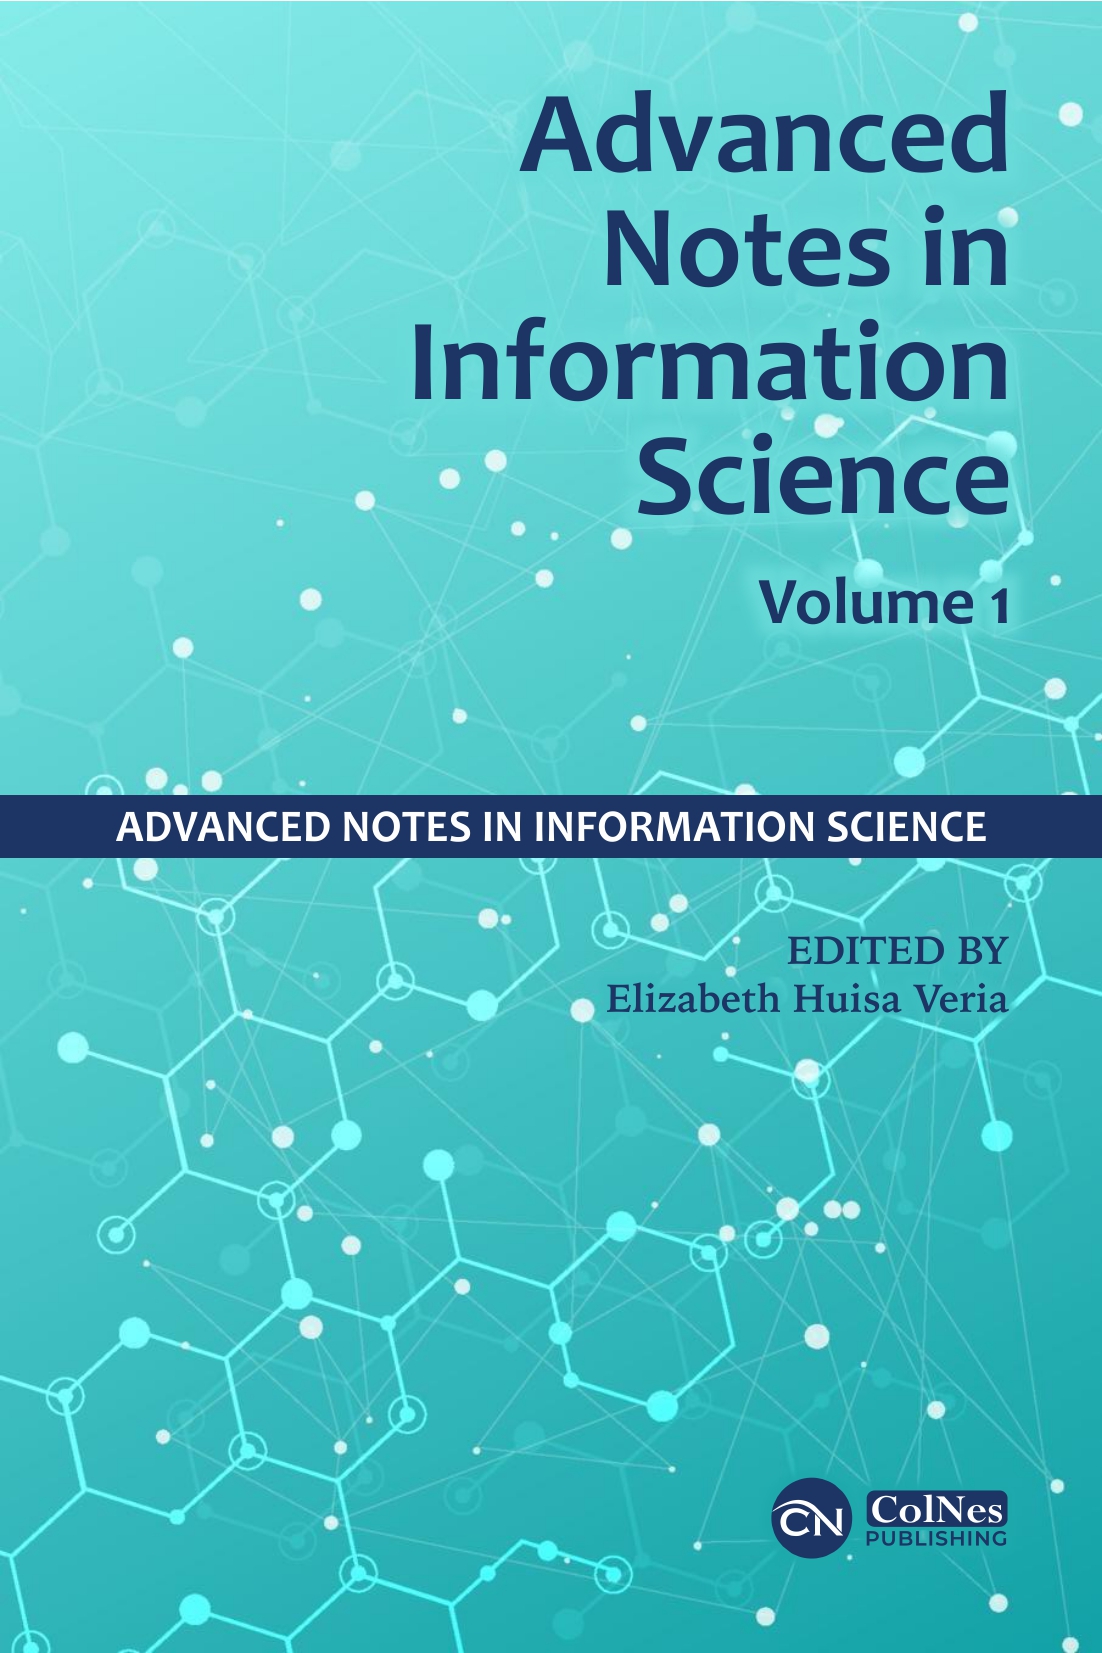 Advanced Notes in Information Science, volume 1